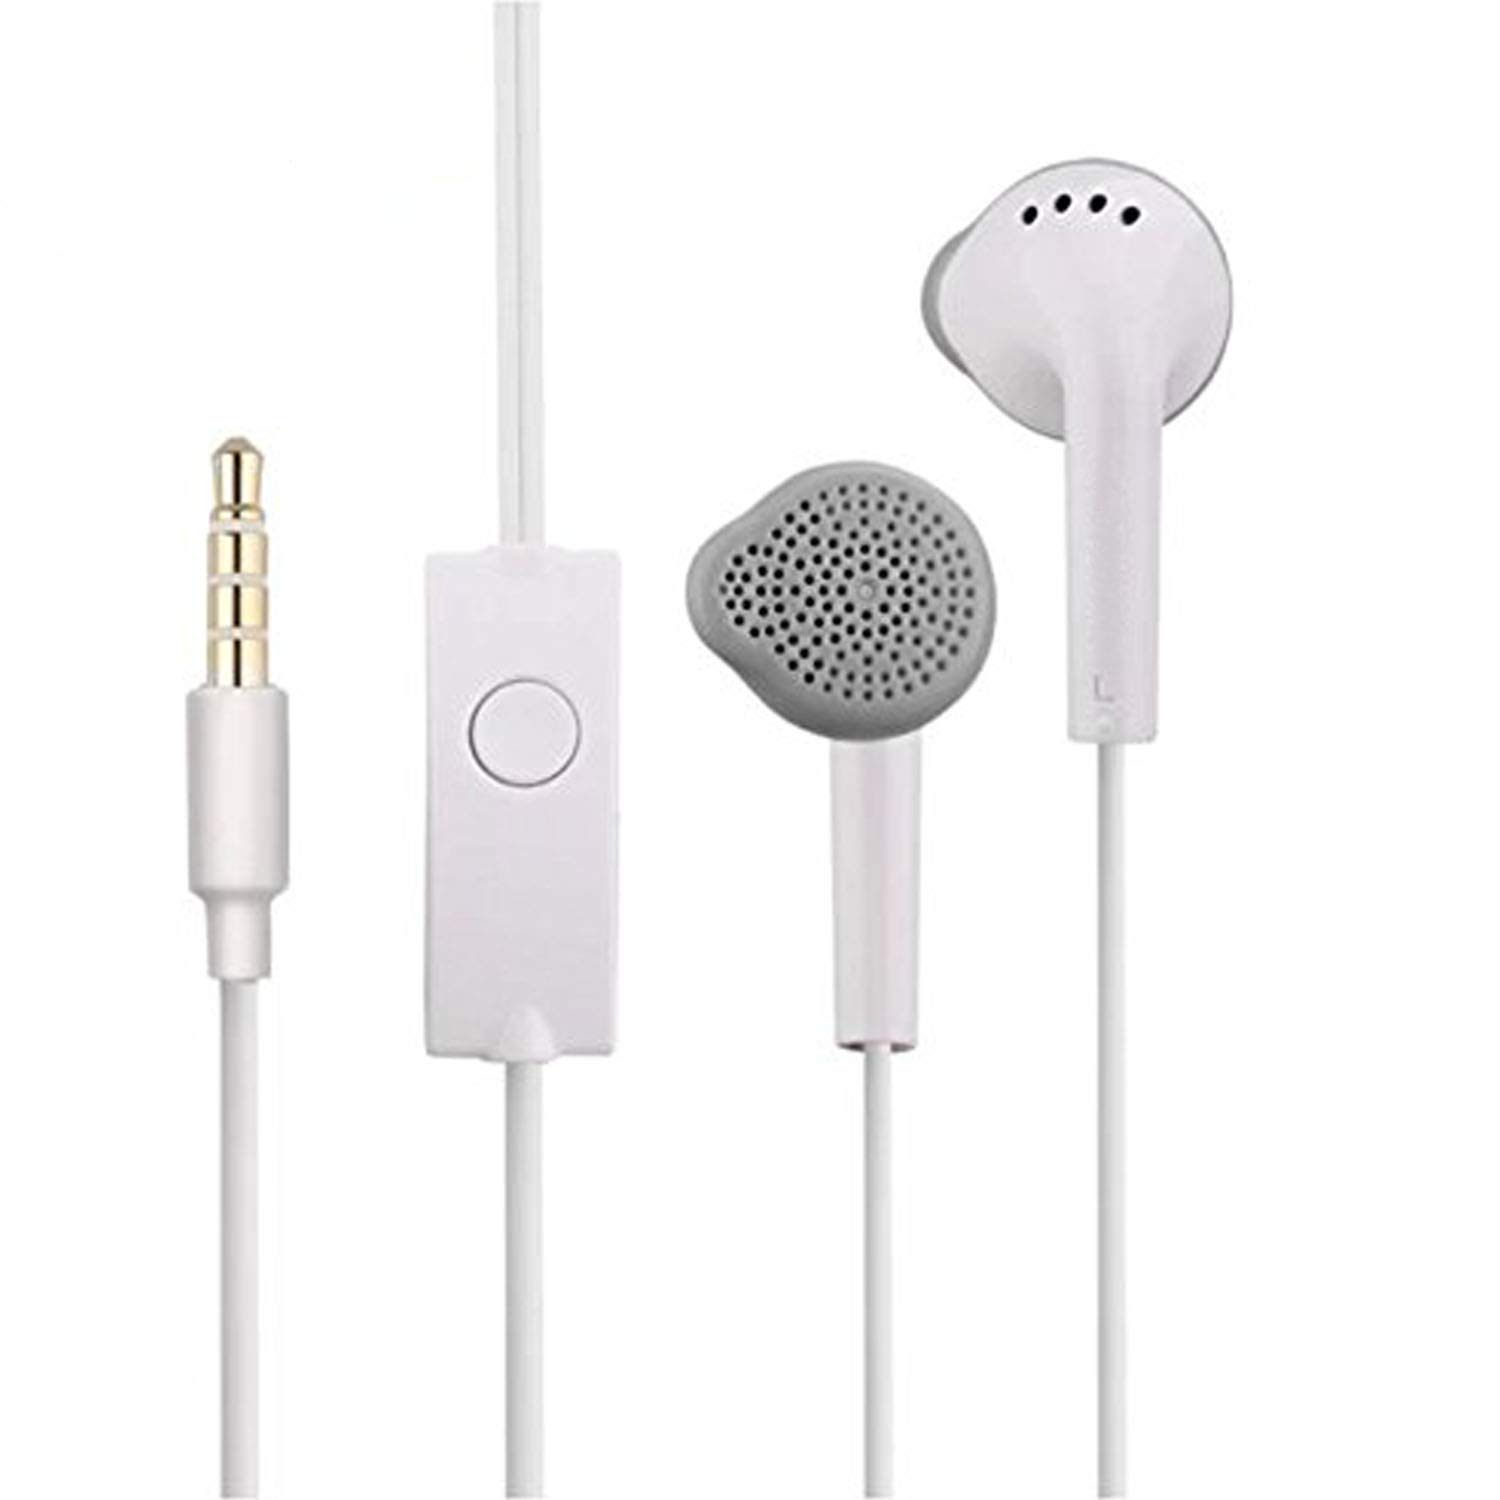 EARPHONE SAMSUNG COPY HIGH QUALITY FOR SMARTPHONE OR TAB عظم, Smartphones & Tab Headsets